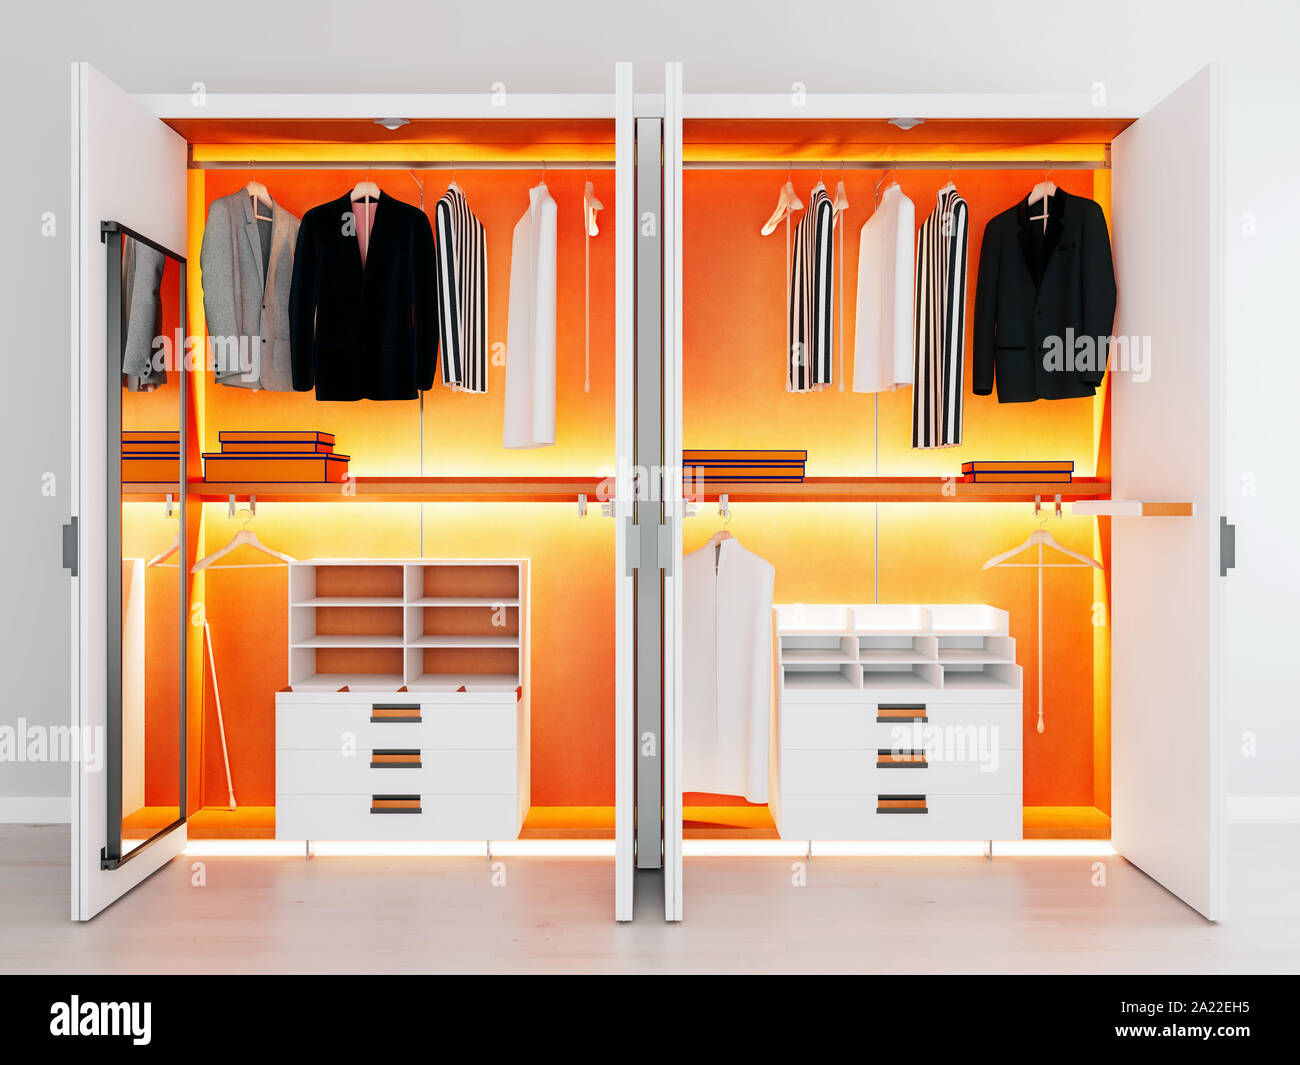 modern white orange wooden and metal wardrobe with men clothes hanging on rail in walk in closet design interior, 3d rendering Stock Photo